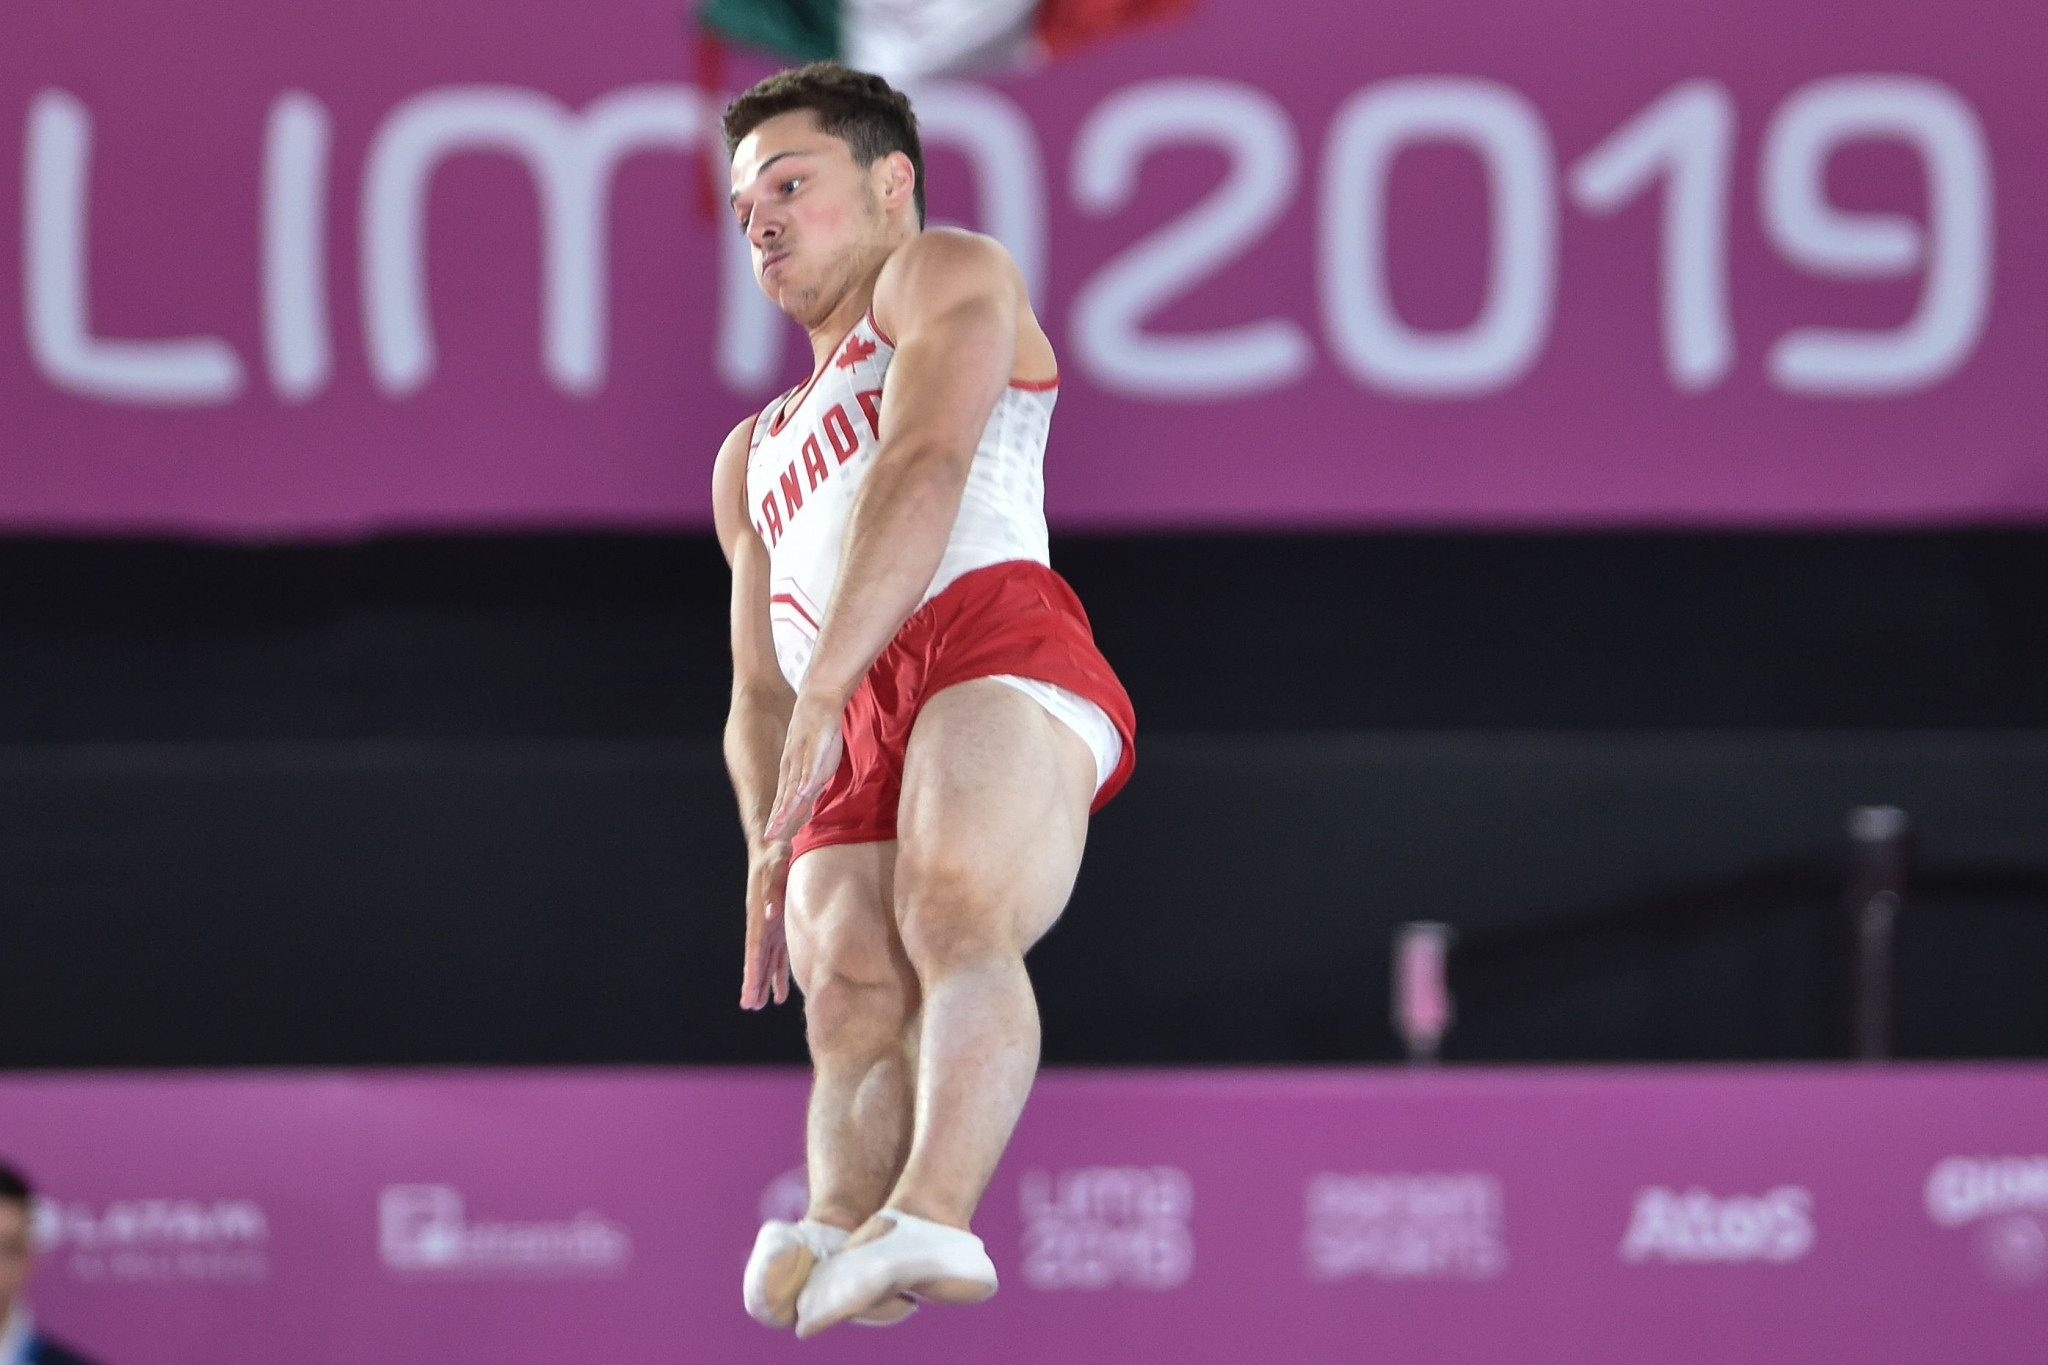 Jeremy Chartier then triumphed in the men's individual trampoline final ©Lima 2019